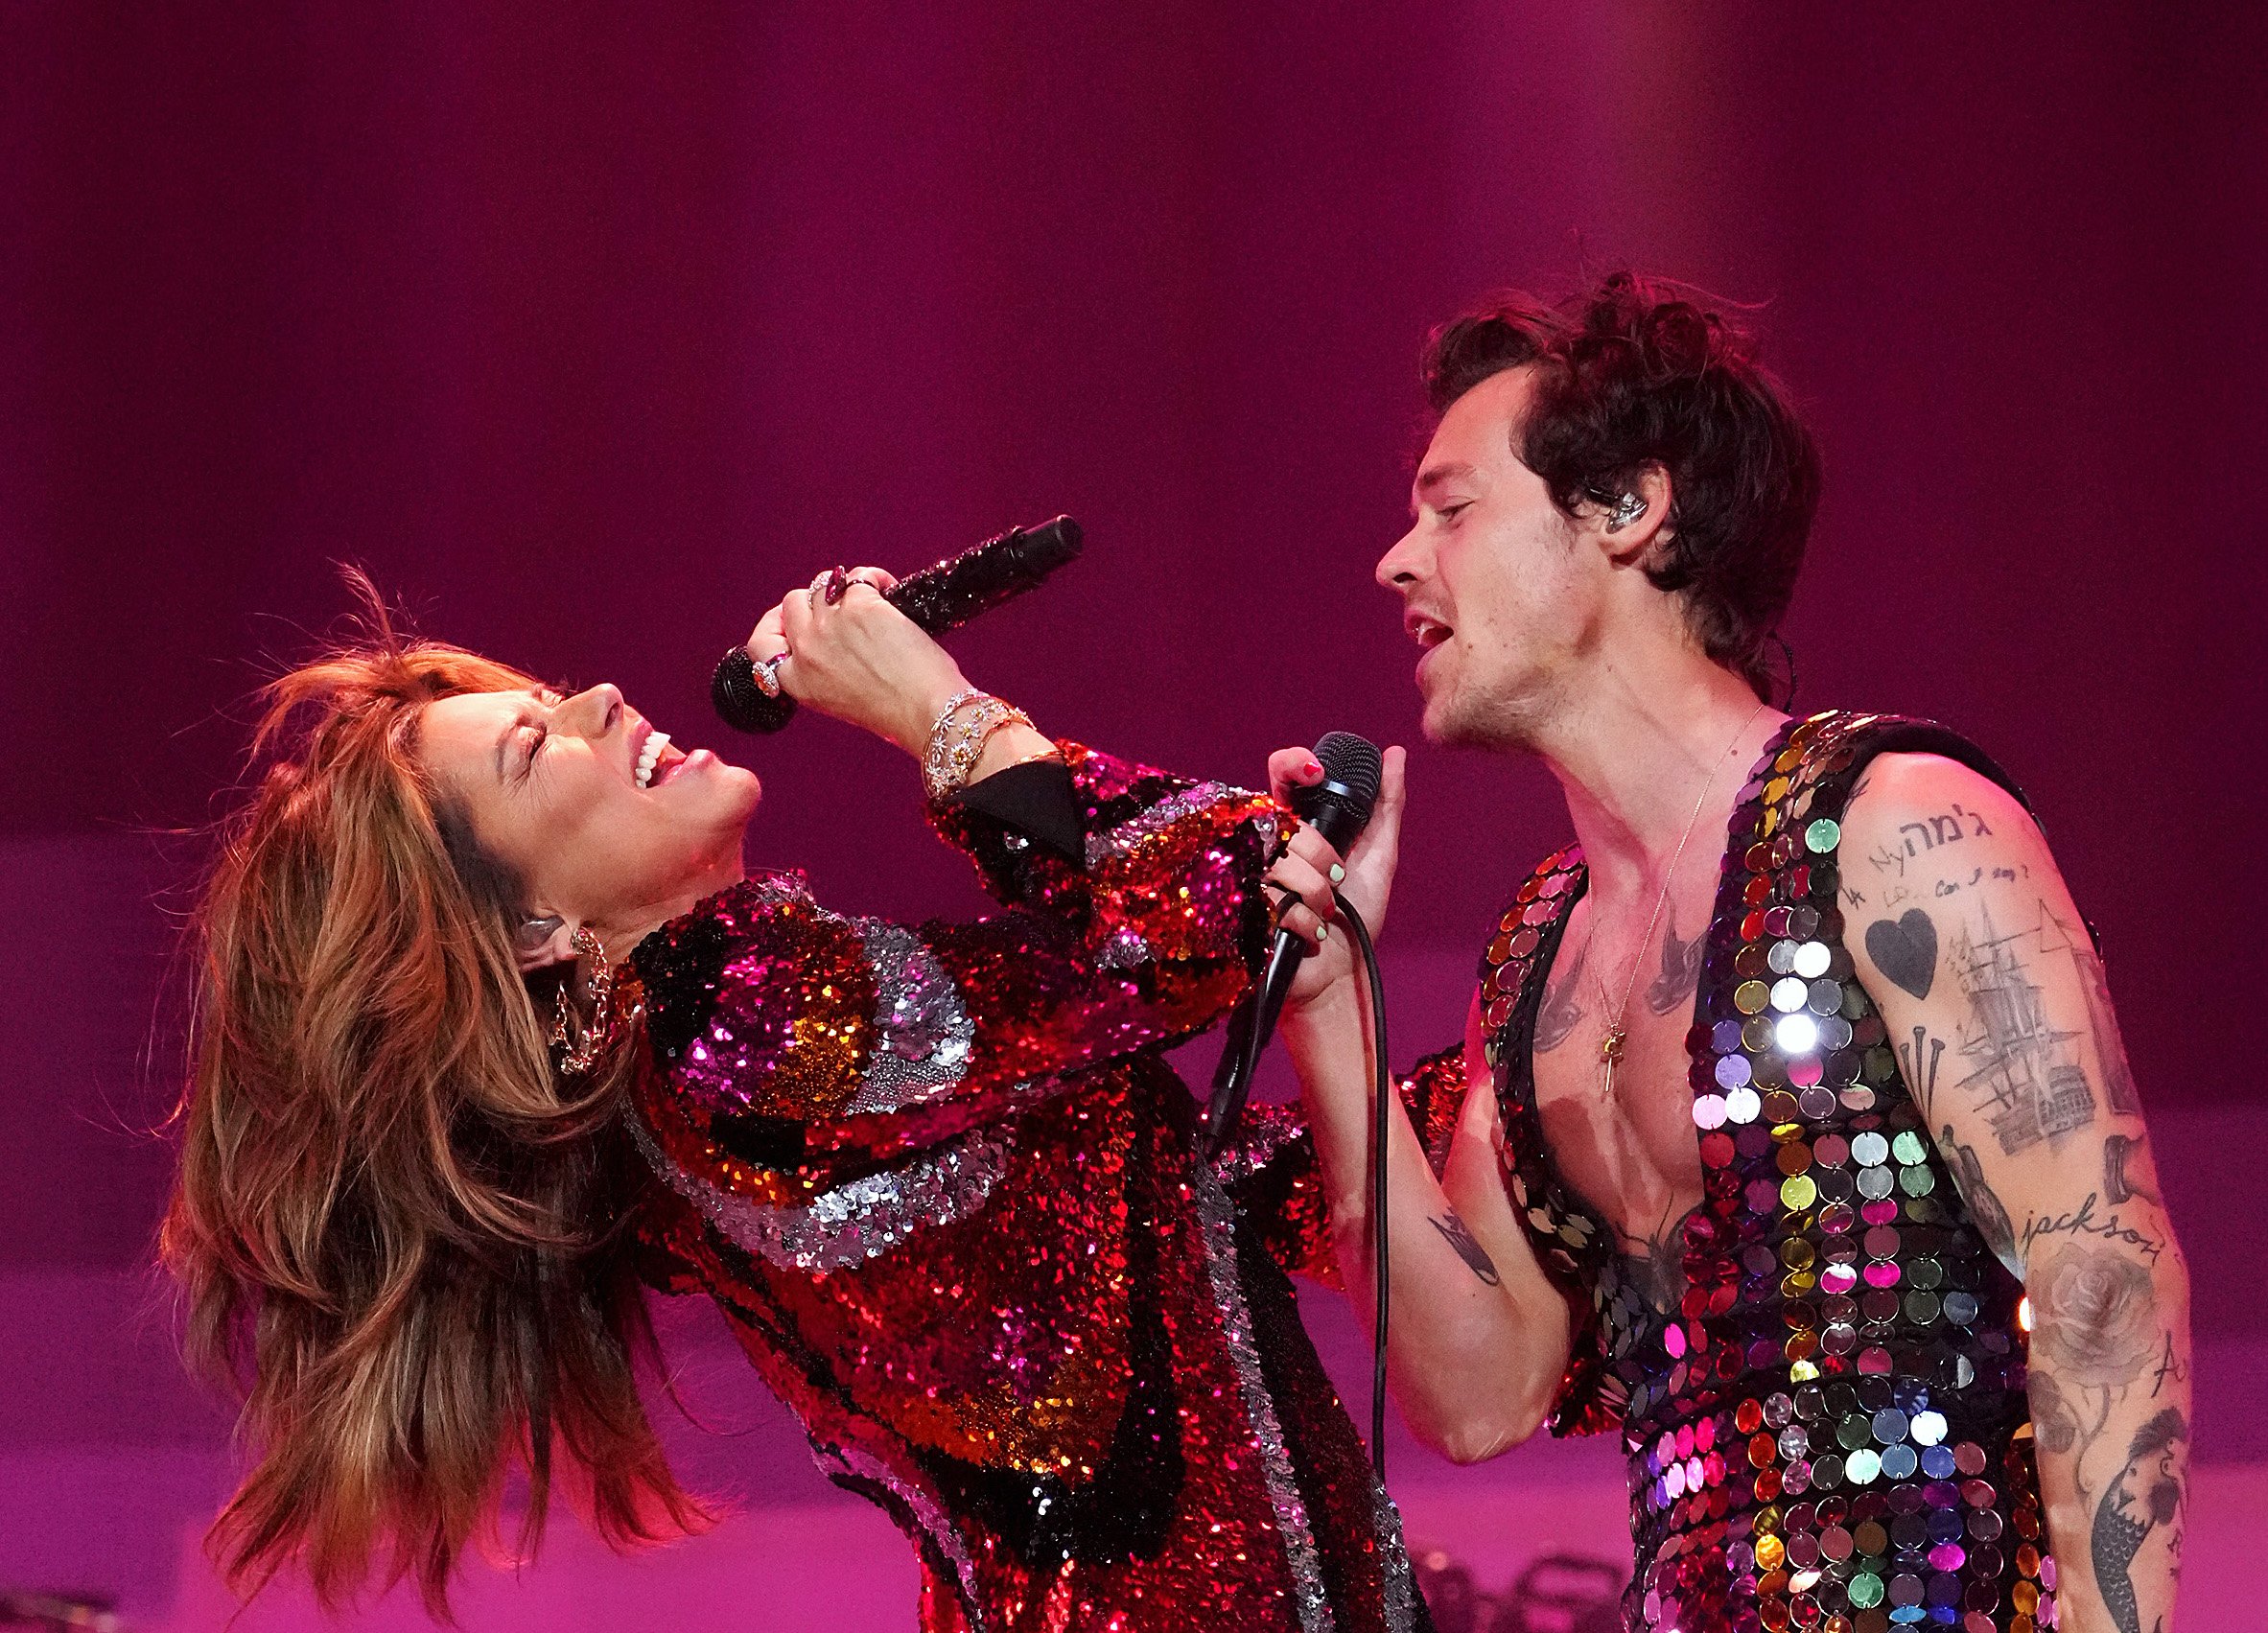 Shania Twain and Harry Styles performing together